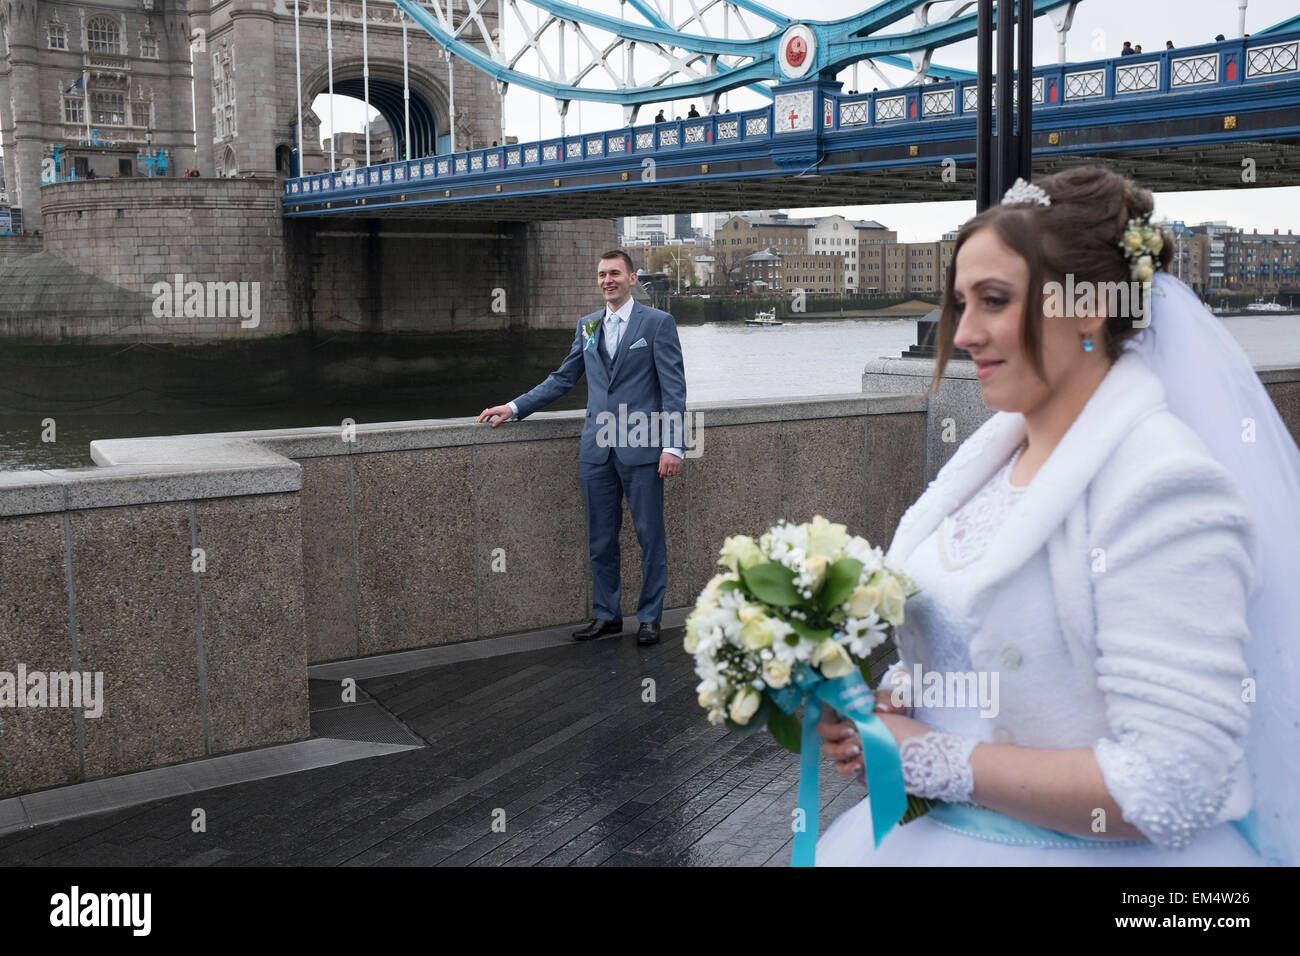 Russian bride and groom having their wedding photos taken at Tower Bridge, London, UK. It is a common site to see Russian and other nationalities having pre-wedding photographs taken at famous sites around the capital. Stock Photo